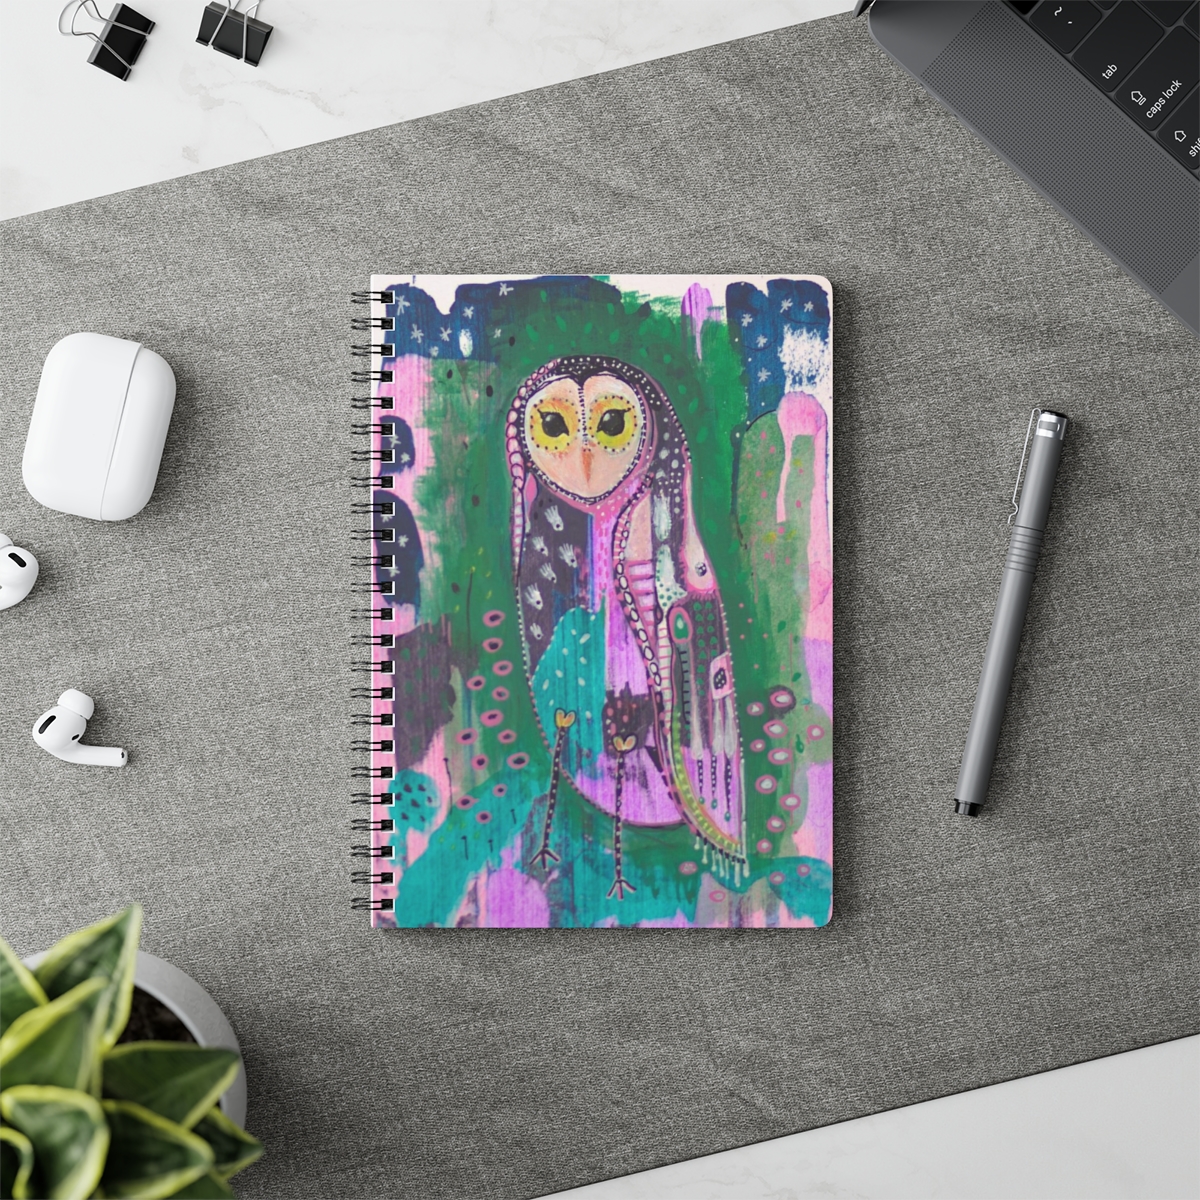 Beautiful Owl notebook in context - Owl Spirit guide is a colourful patchwork, whimsical owl based on the barn owl. She stands against an abstract background of green, pink and blue.